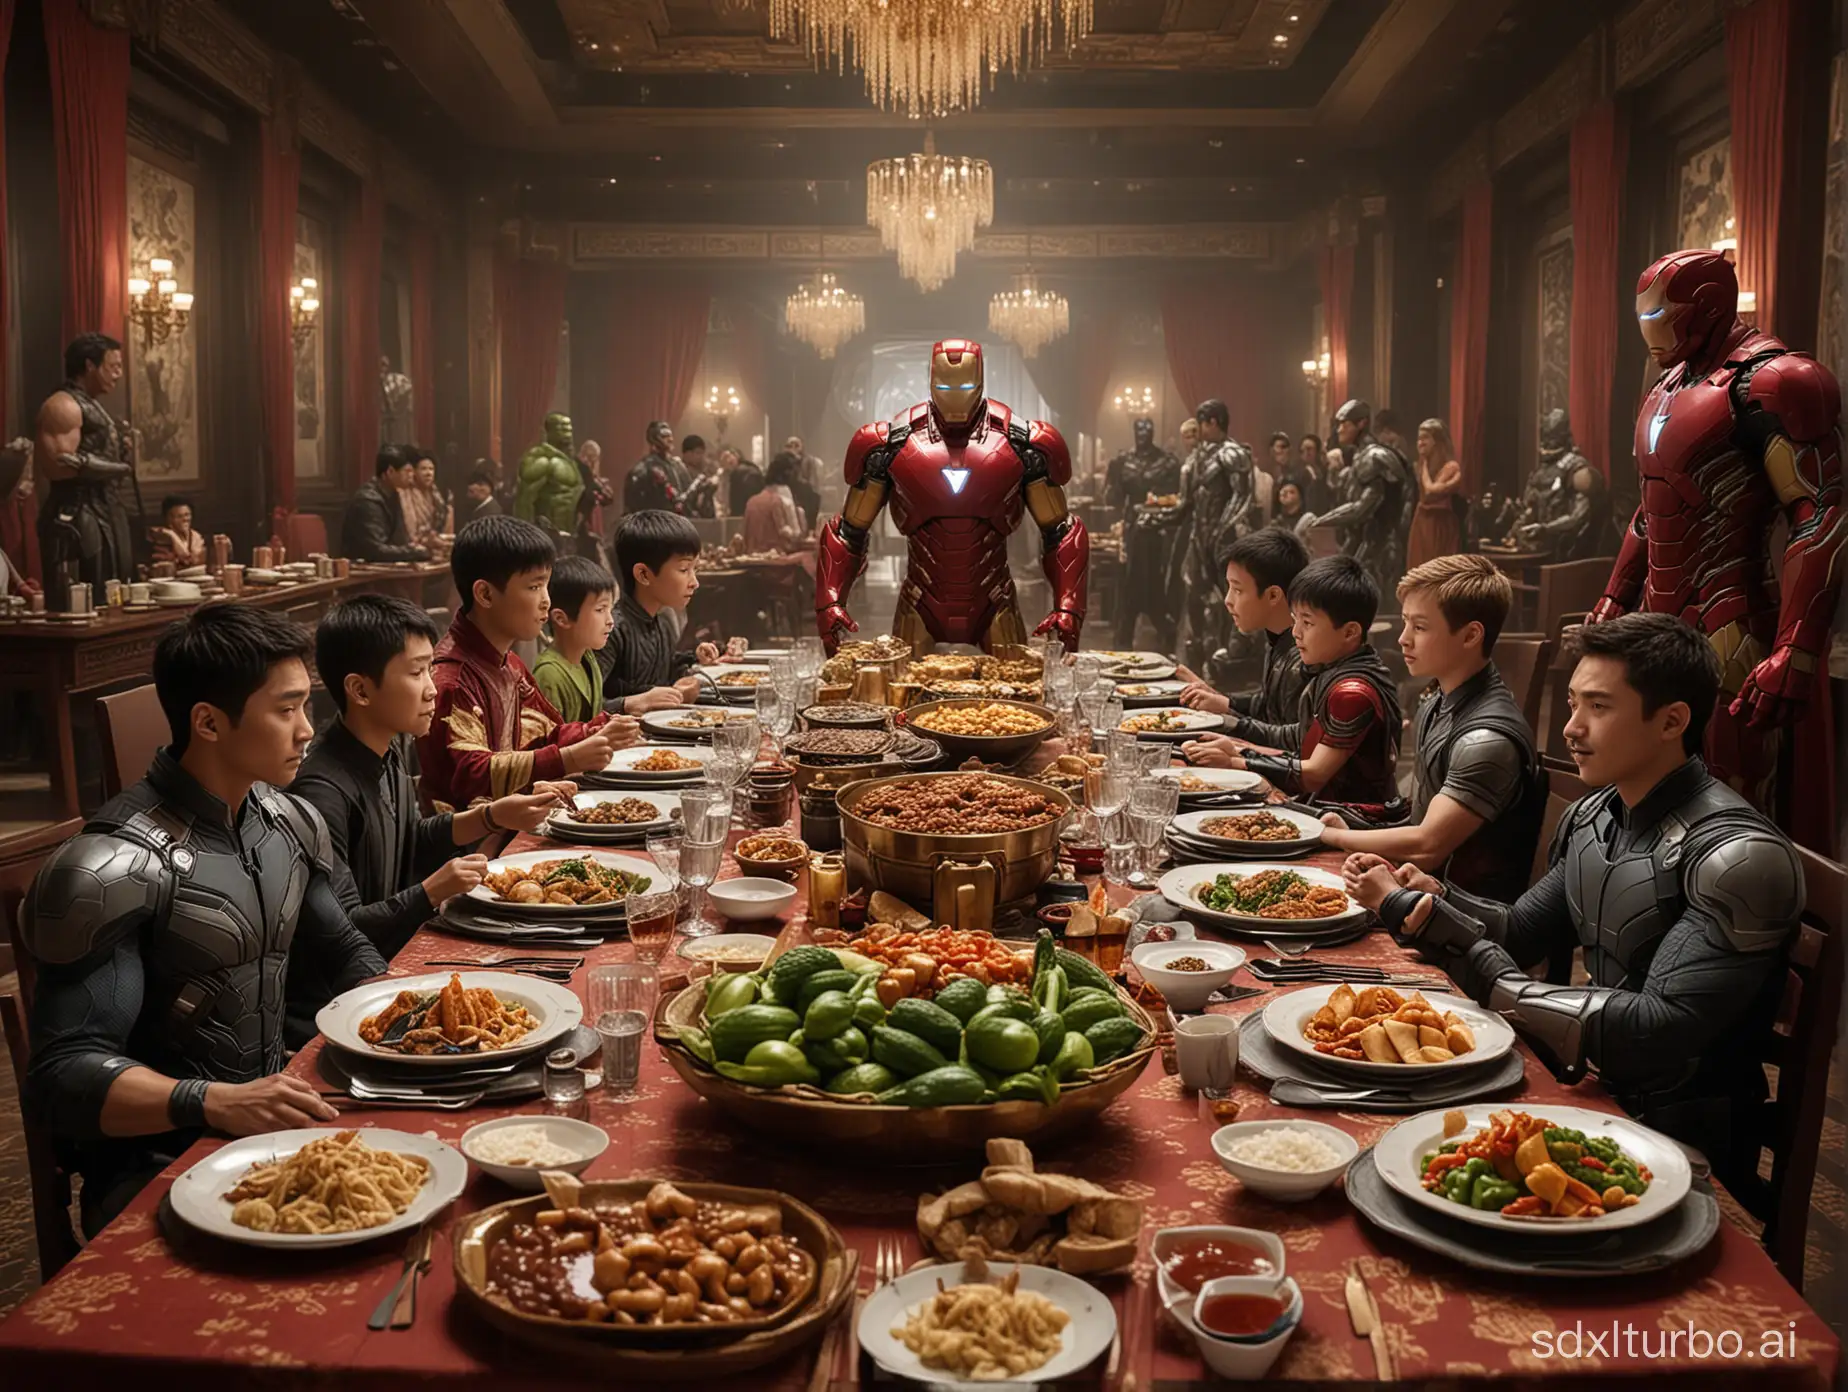 Superheroes-Feast-Young-Boy-Dines-with-Iconic-Characters-in-Extravagant-Chinese-Banquet